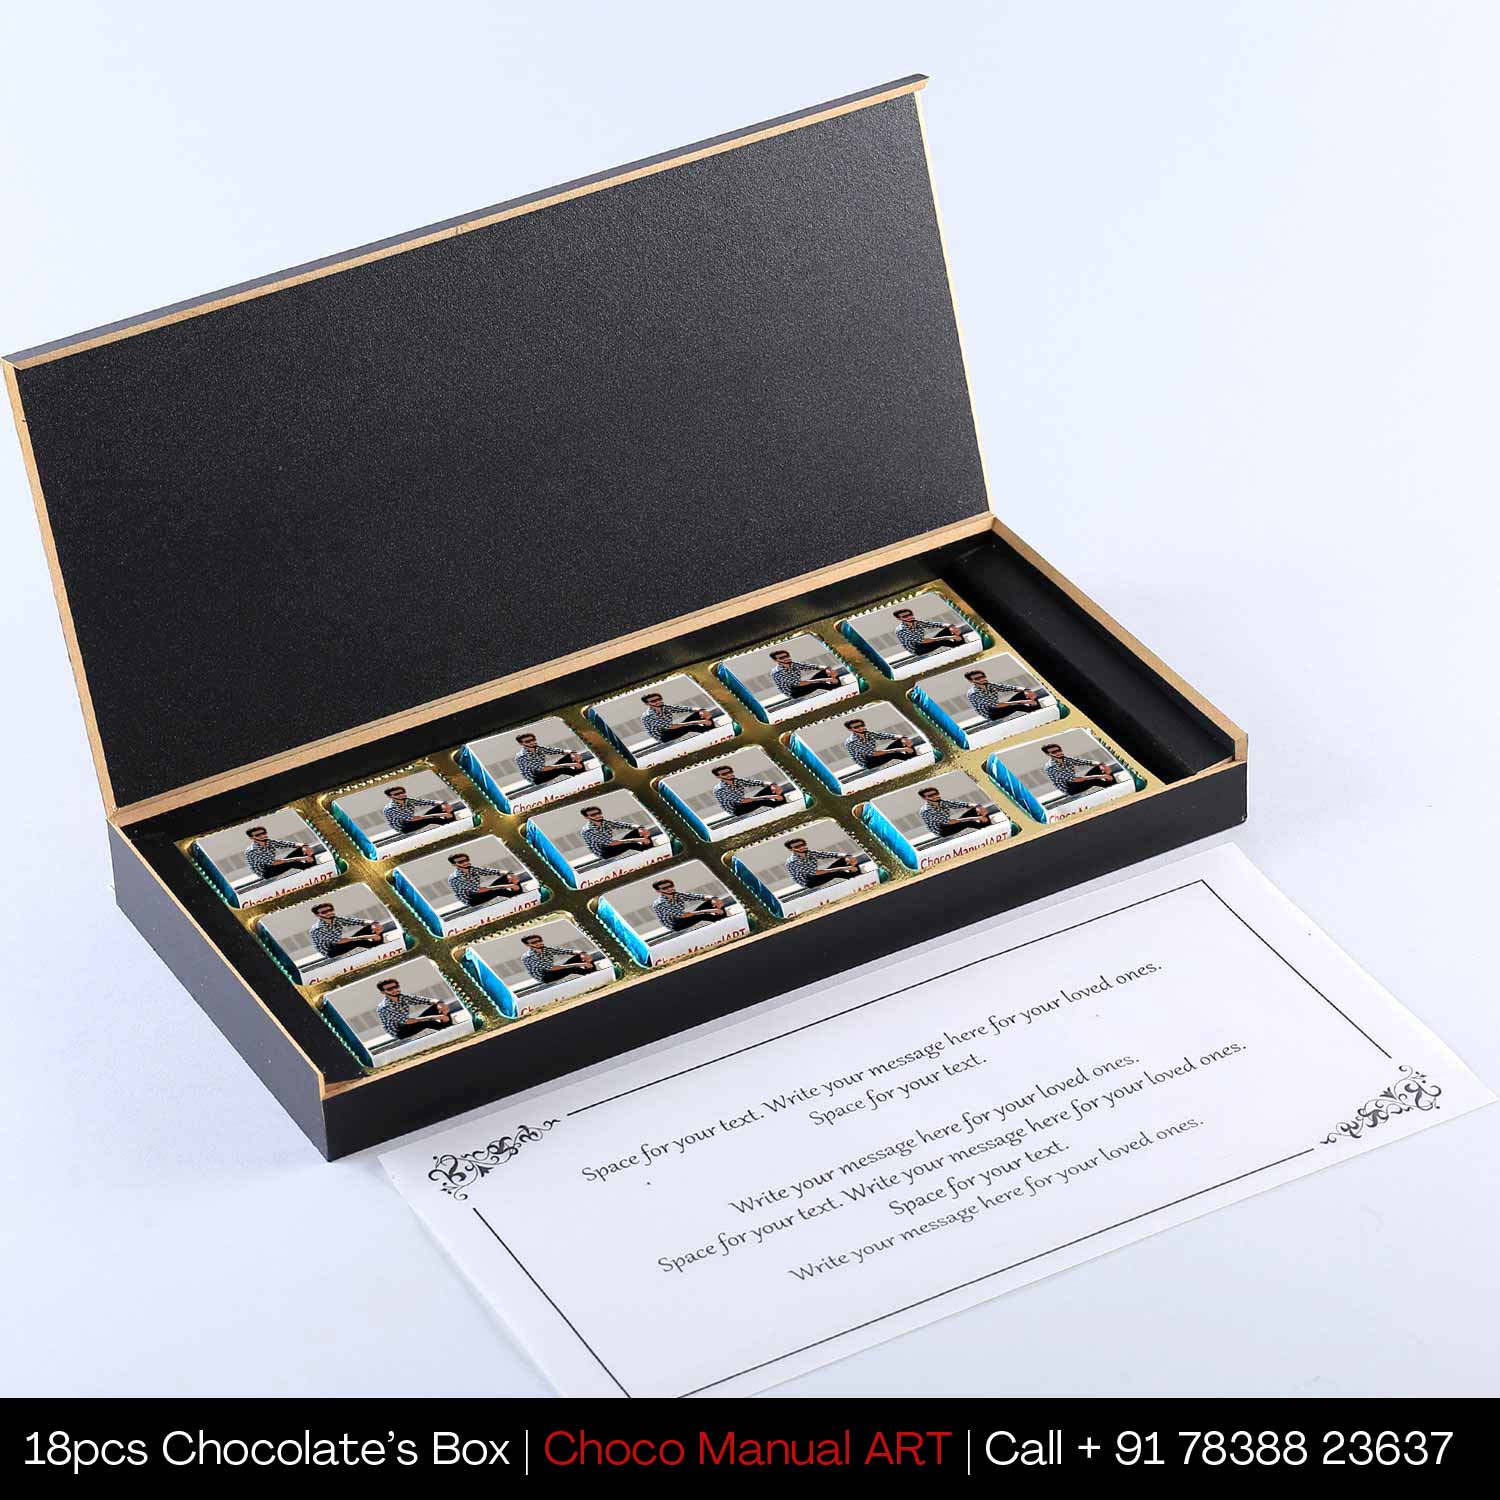 Customized Photo print chocolates with a special message